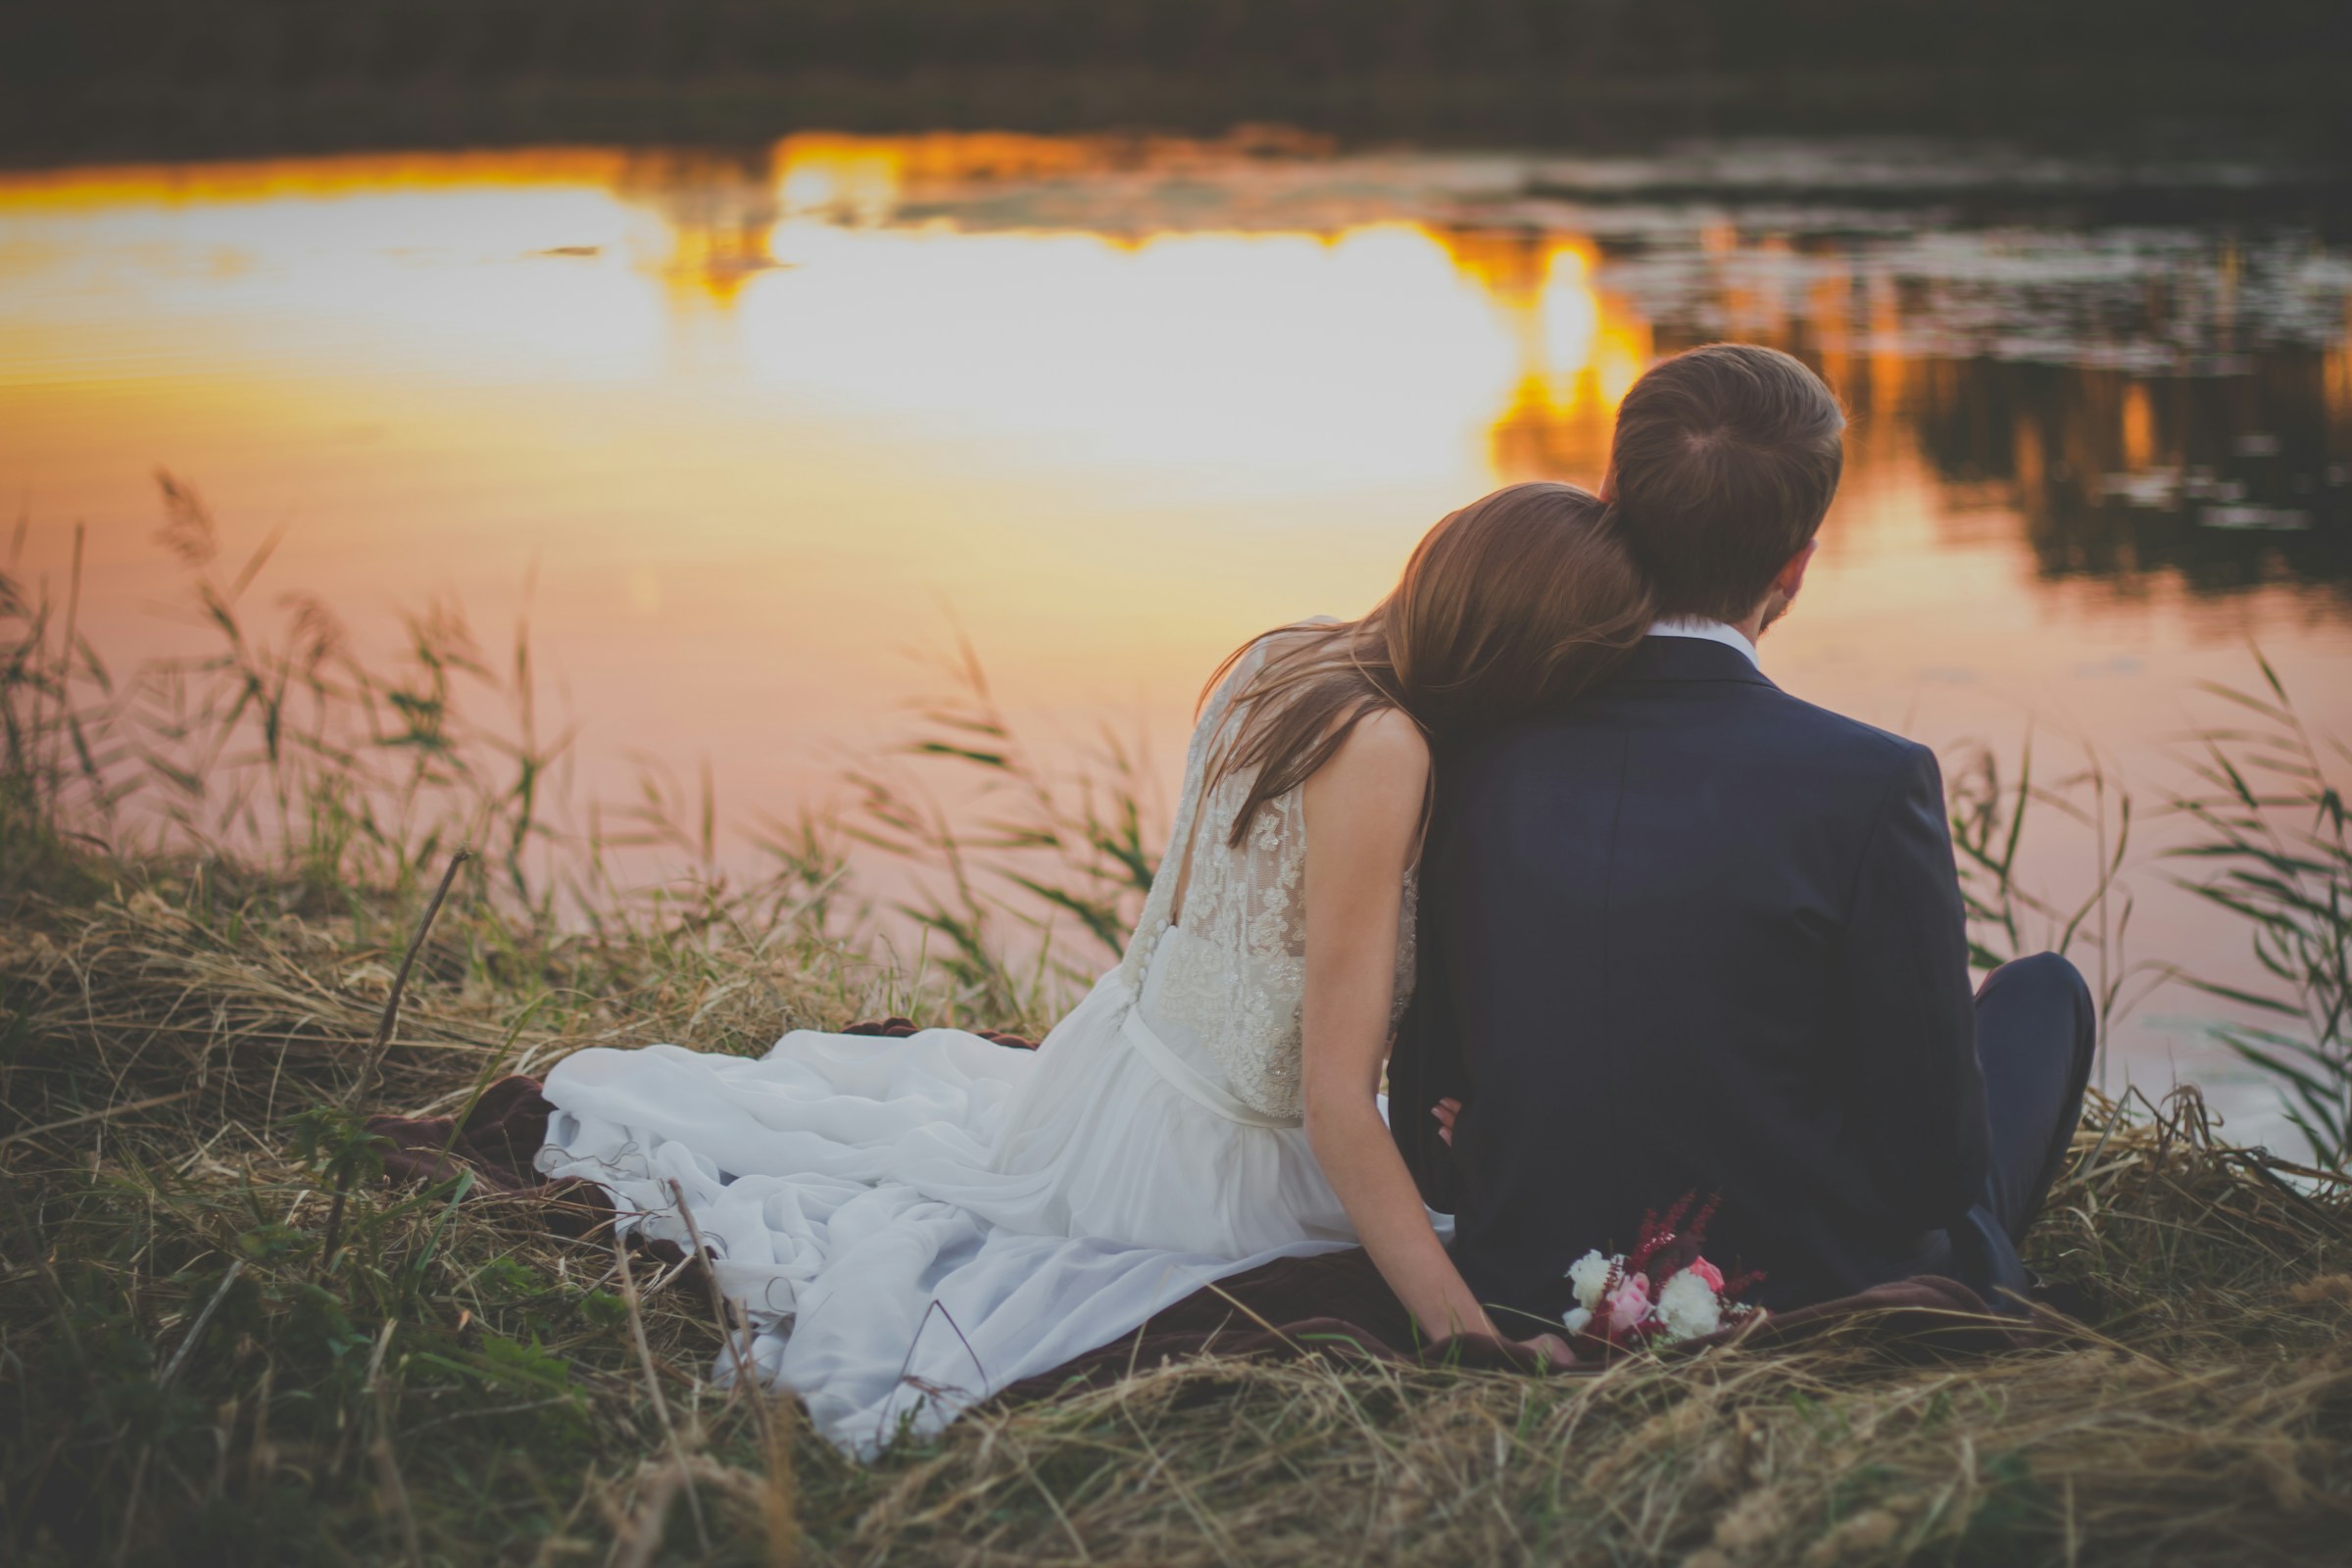 A bride and groom sitting by a lake | Source: Unsplash